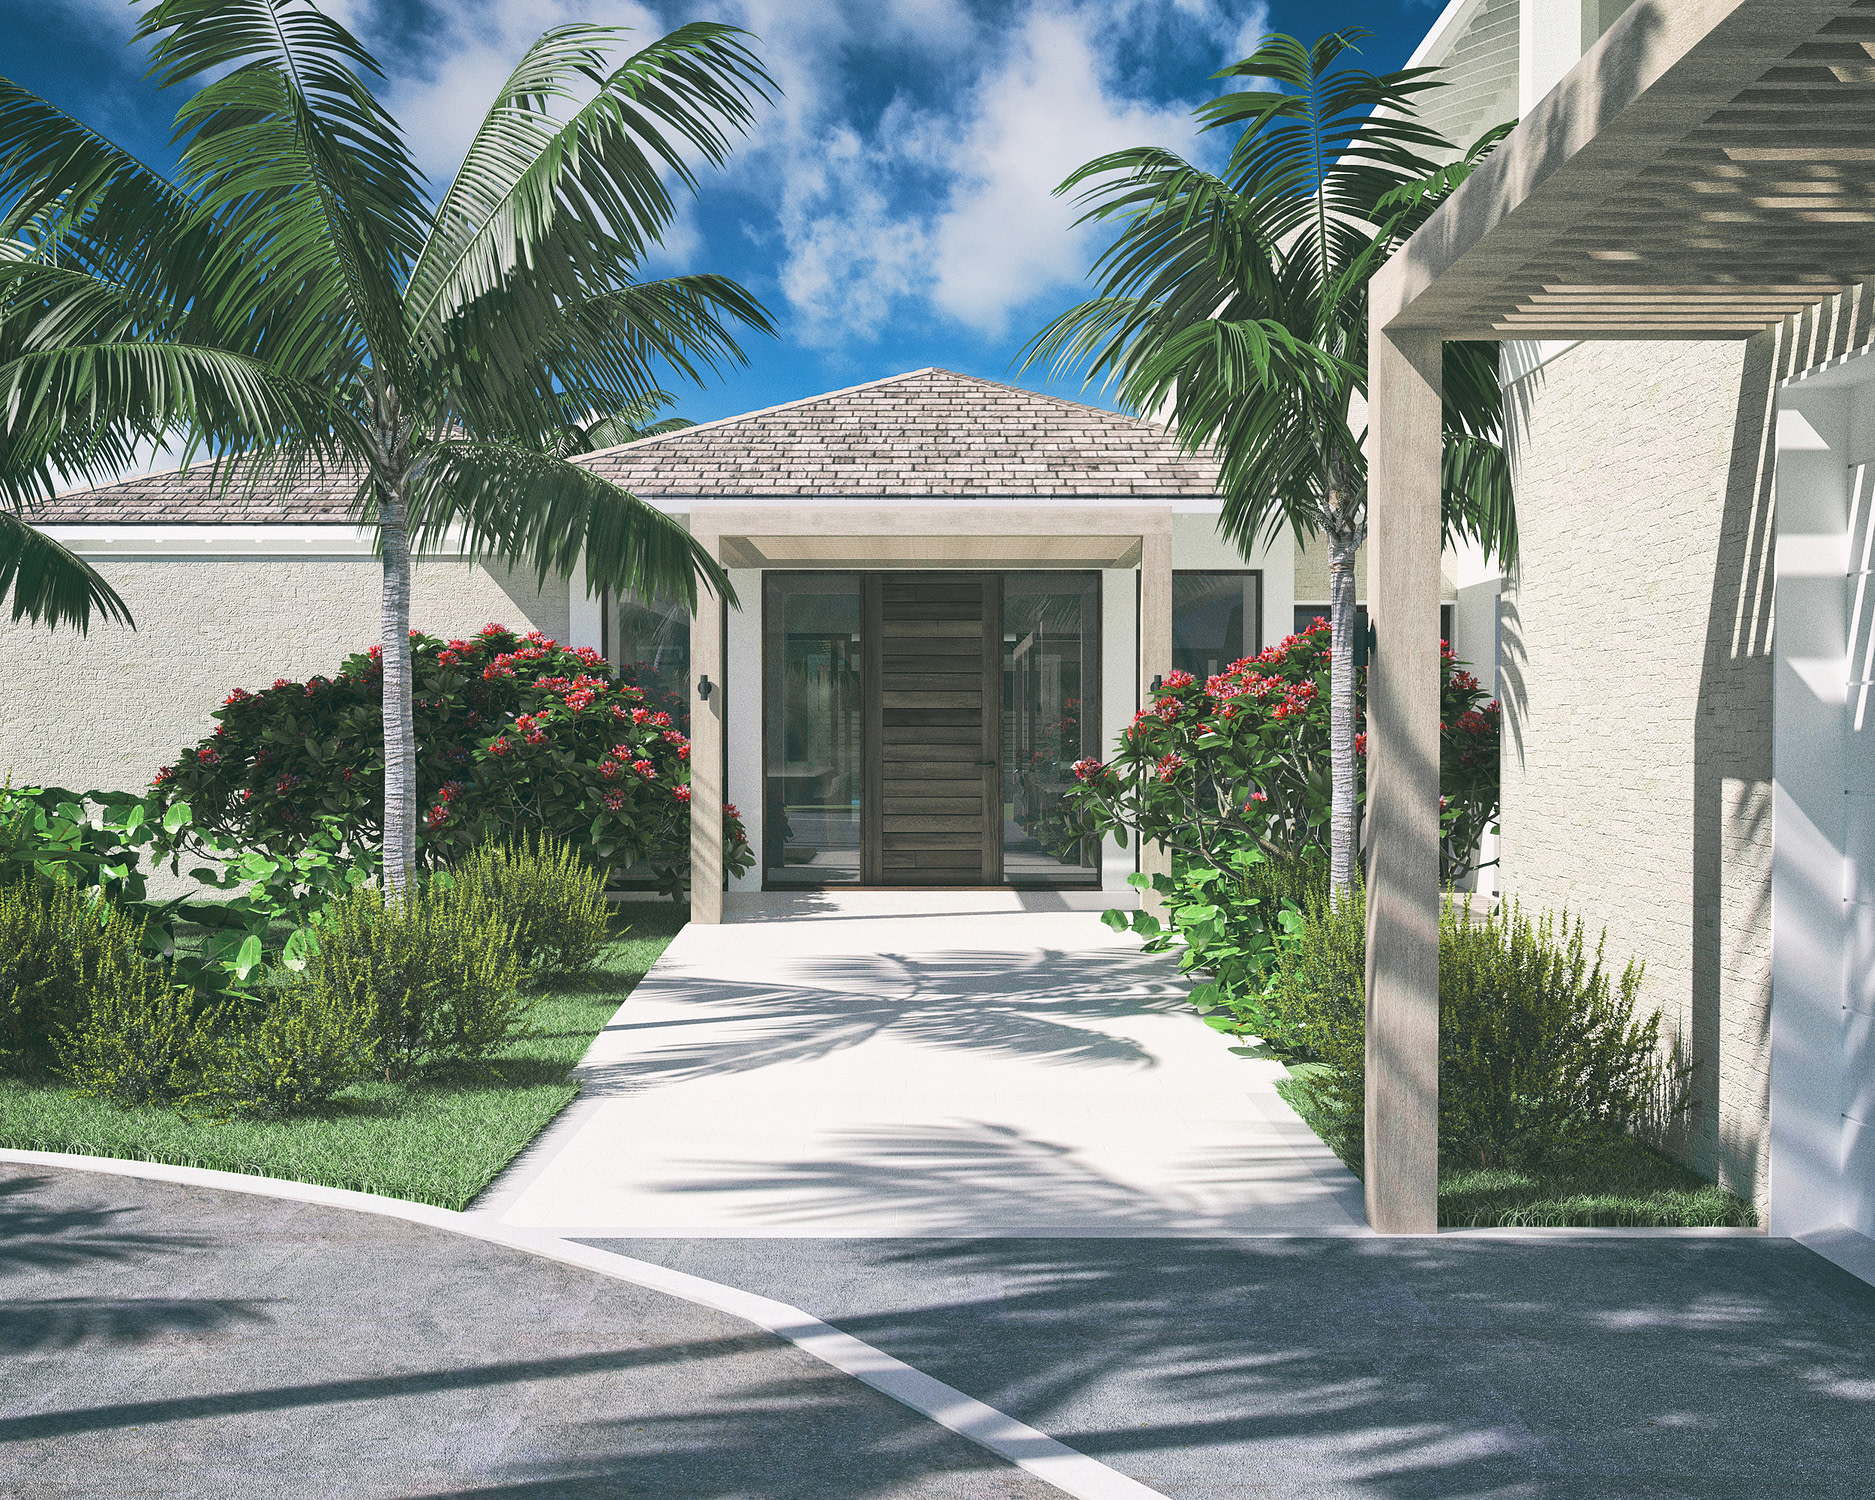 Rendered image of the front entrance